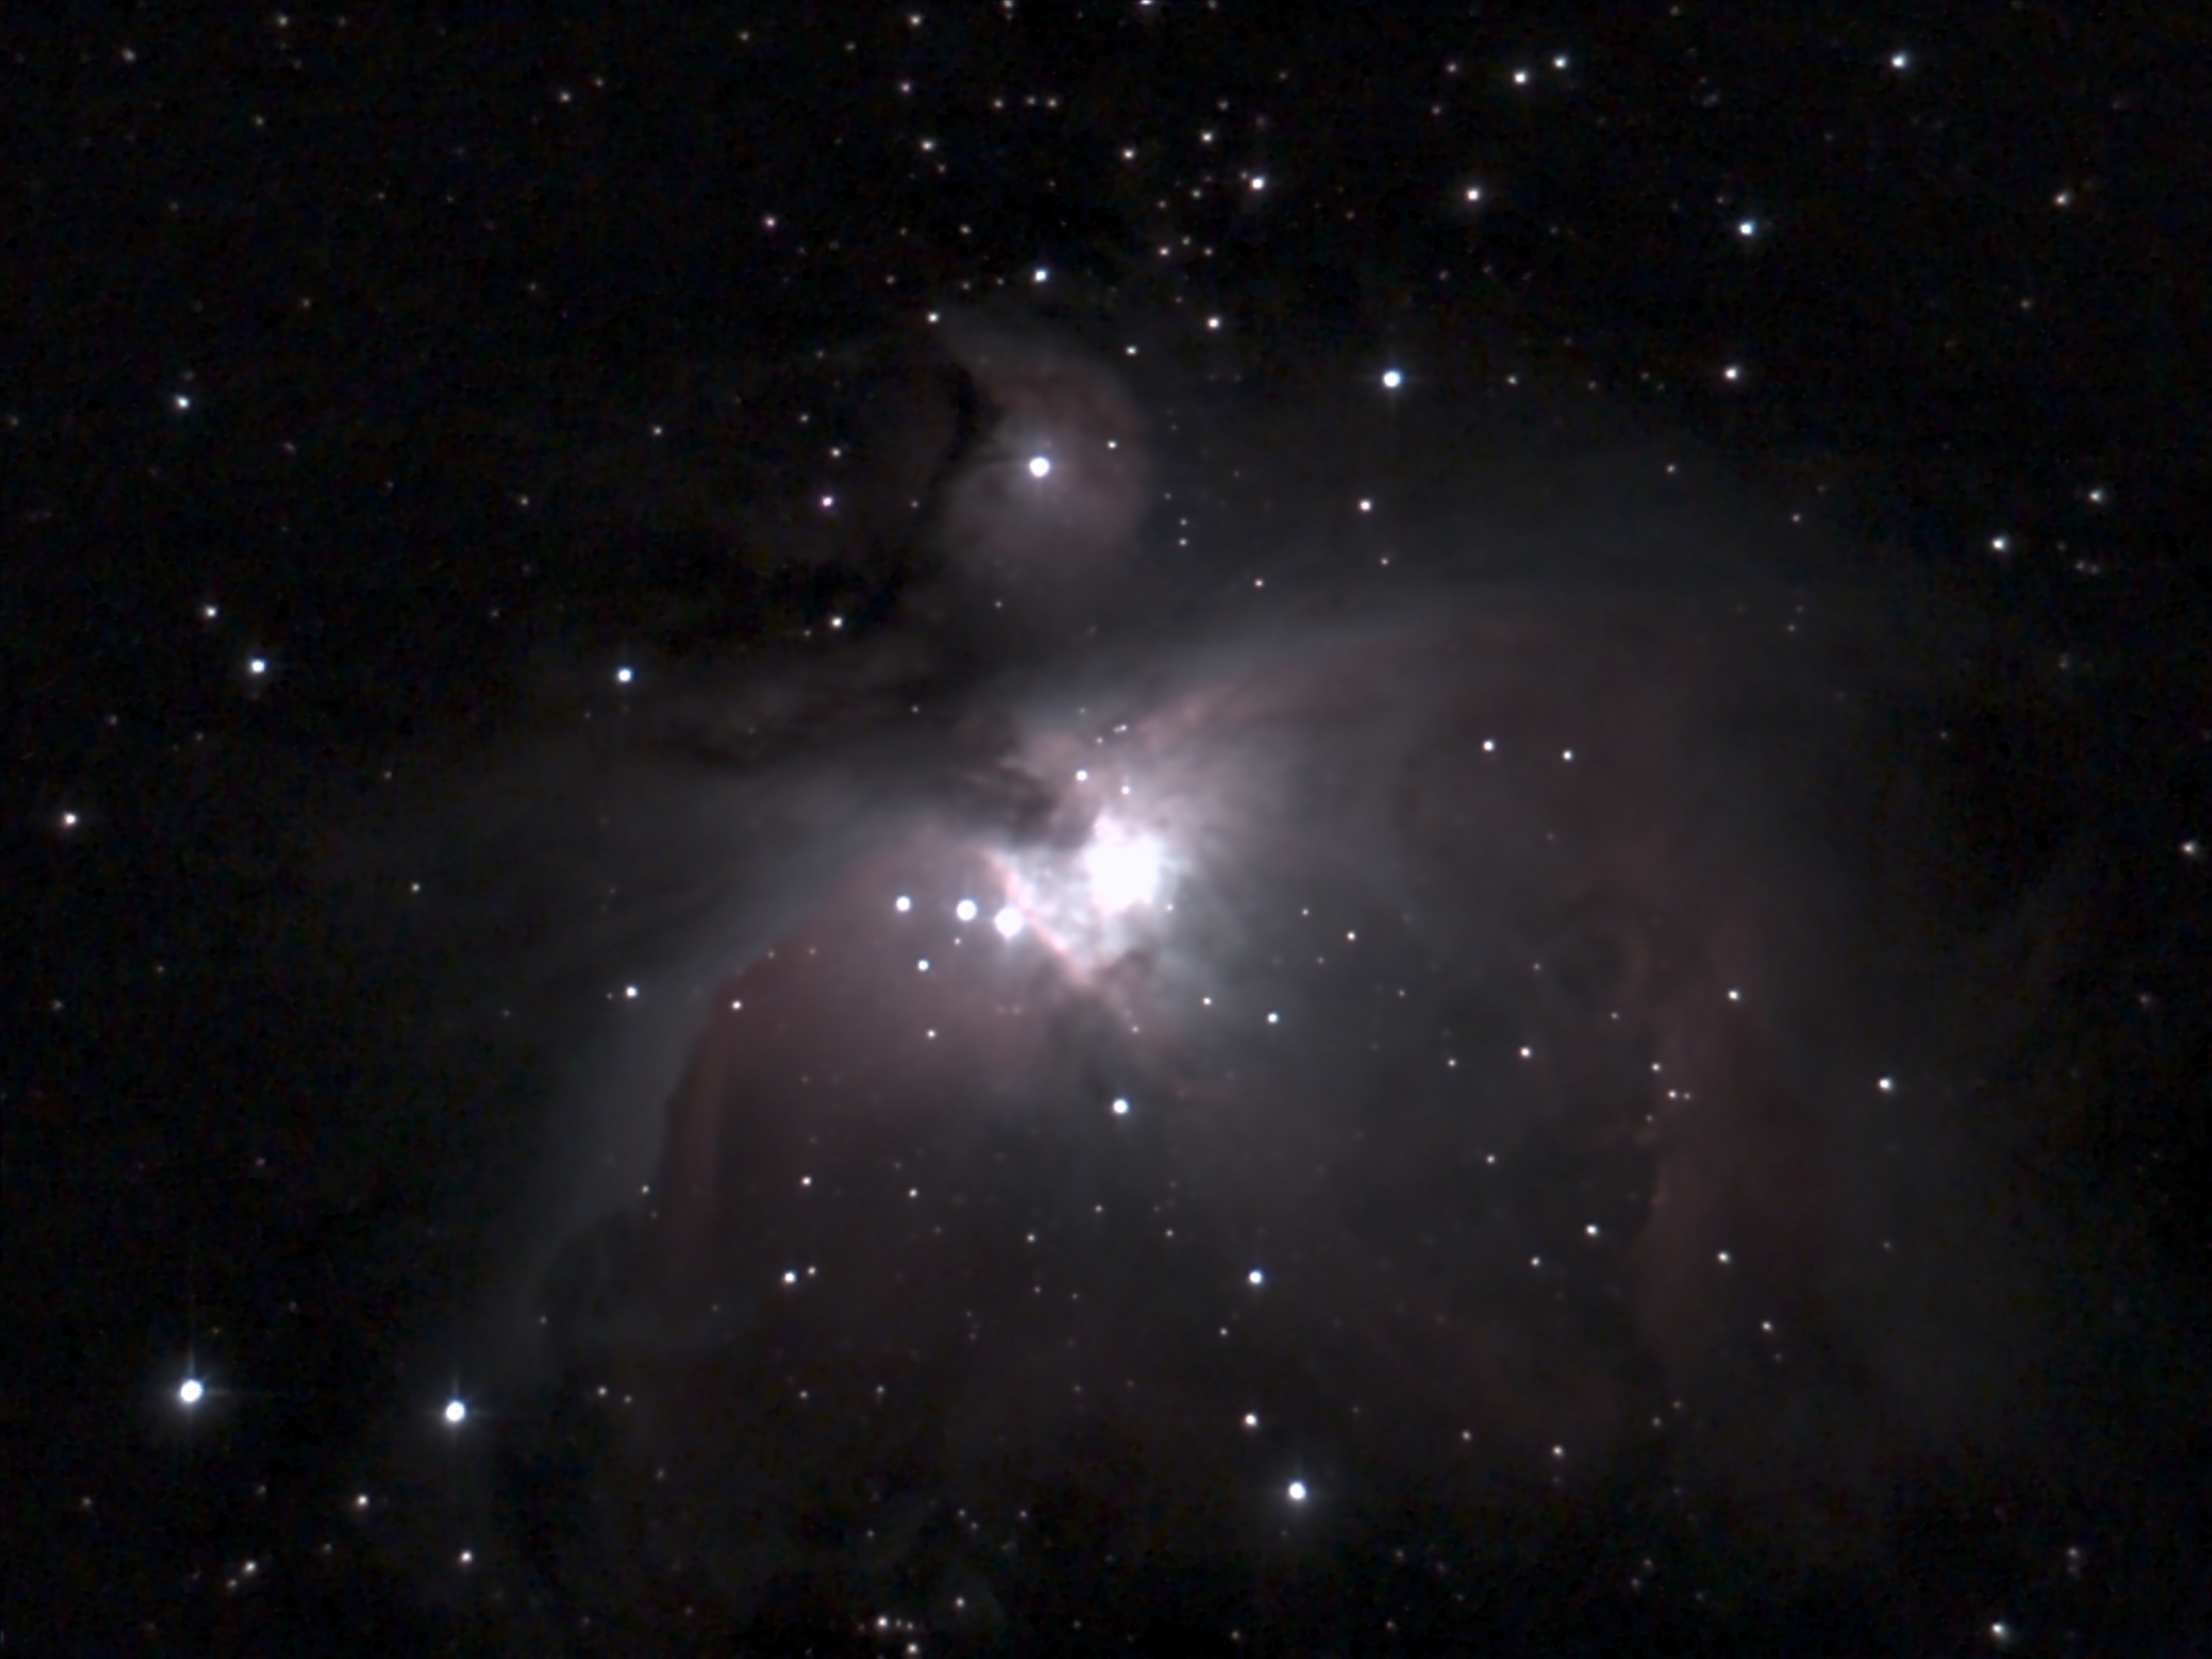 4 minutes developed image of M42 Great nebula in Orion taken with the Unistellar Odyssey Pro